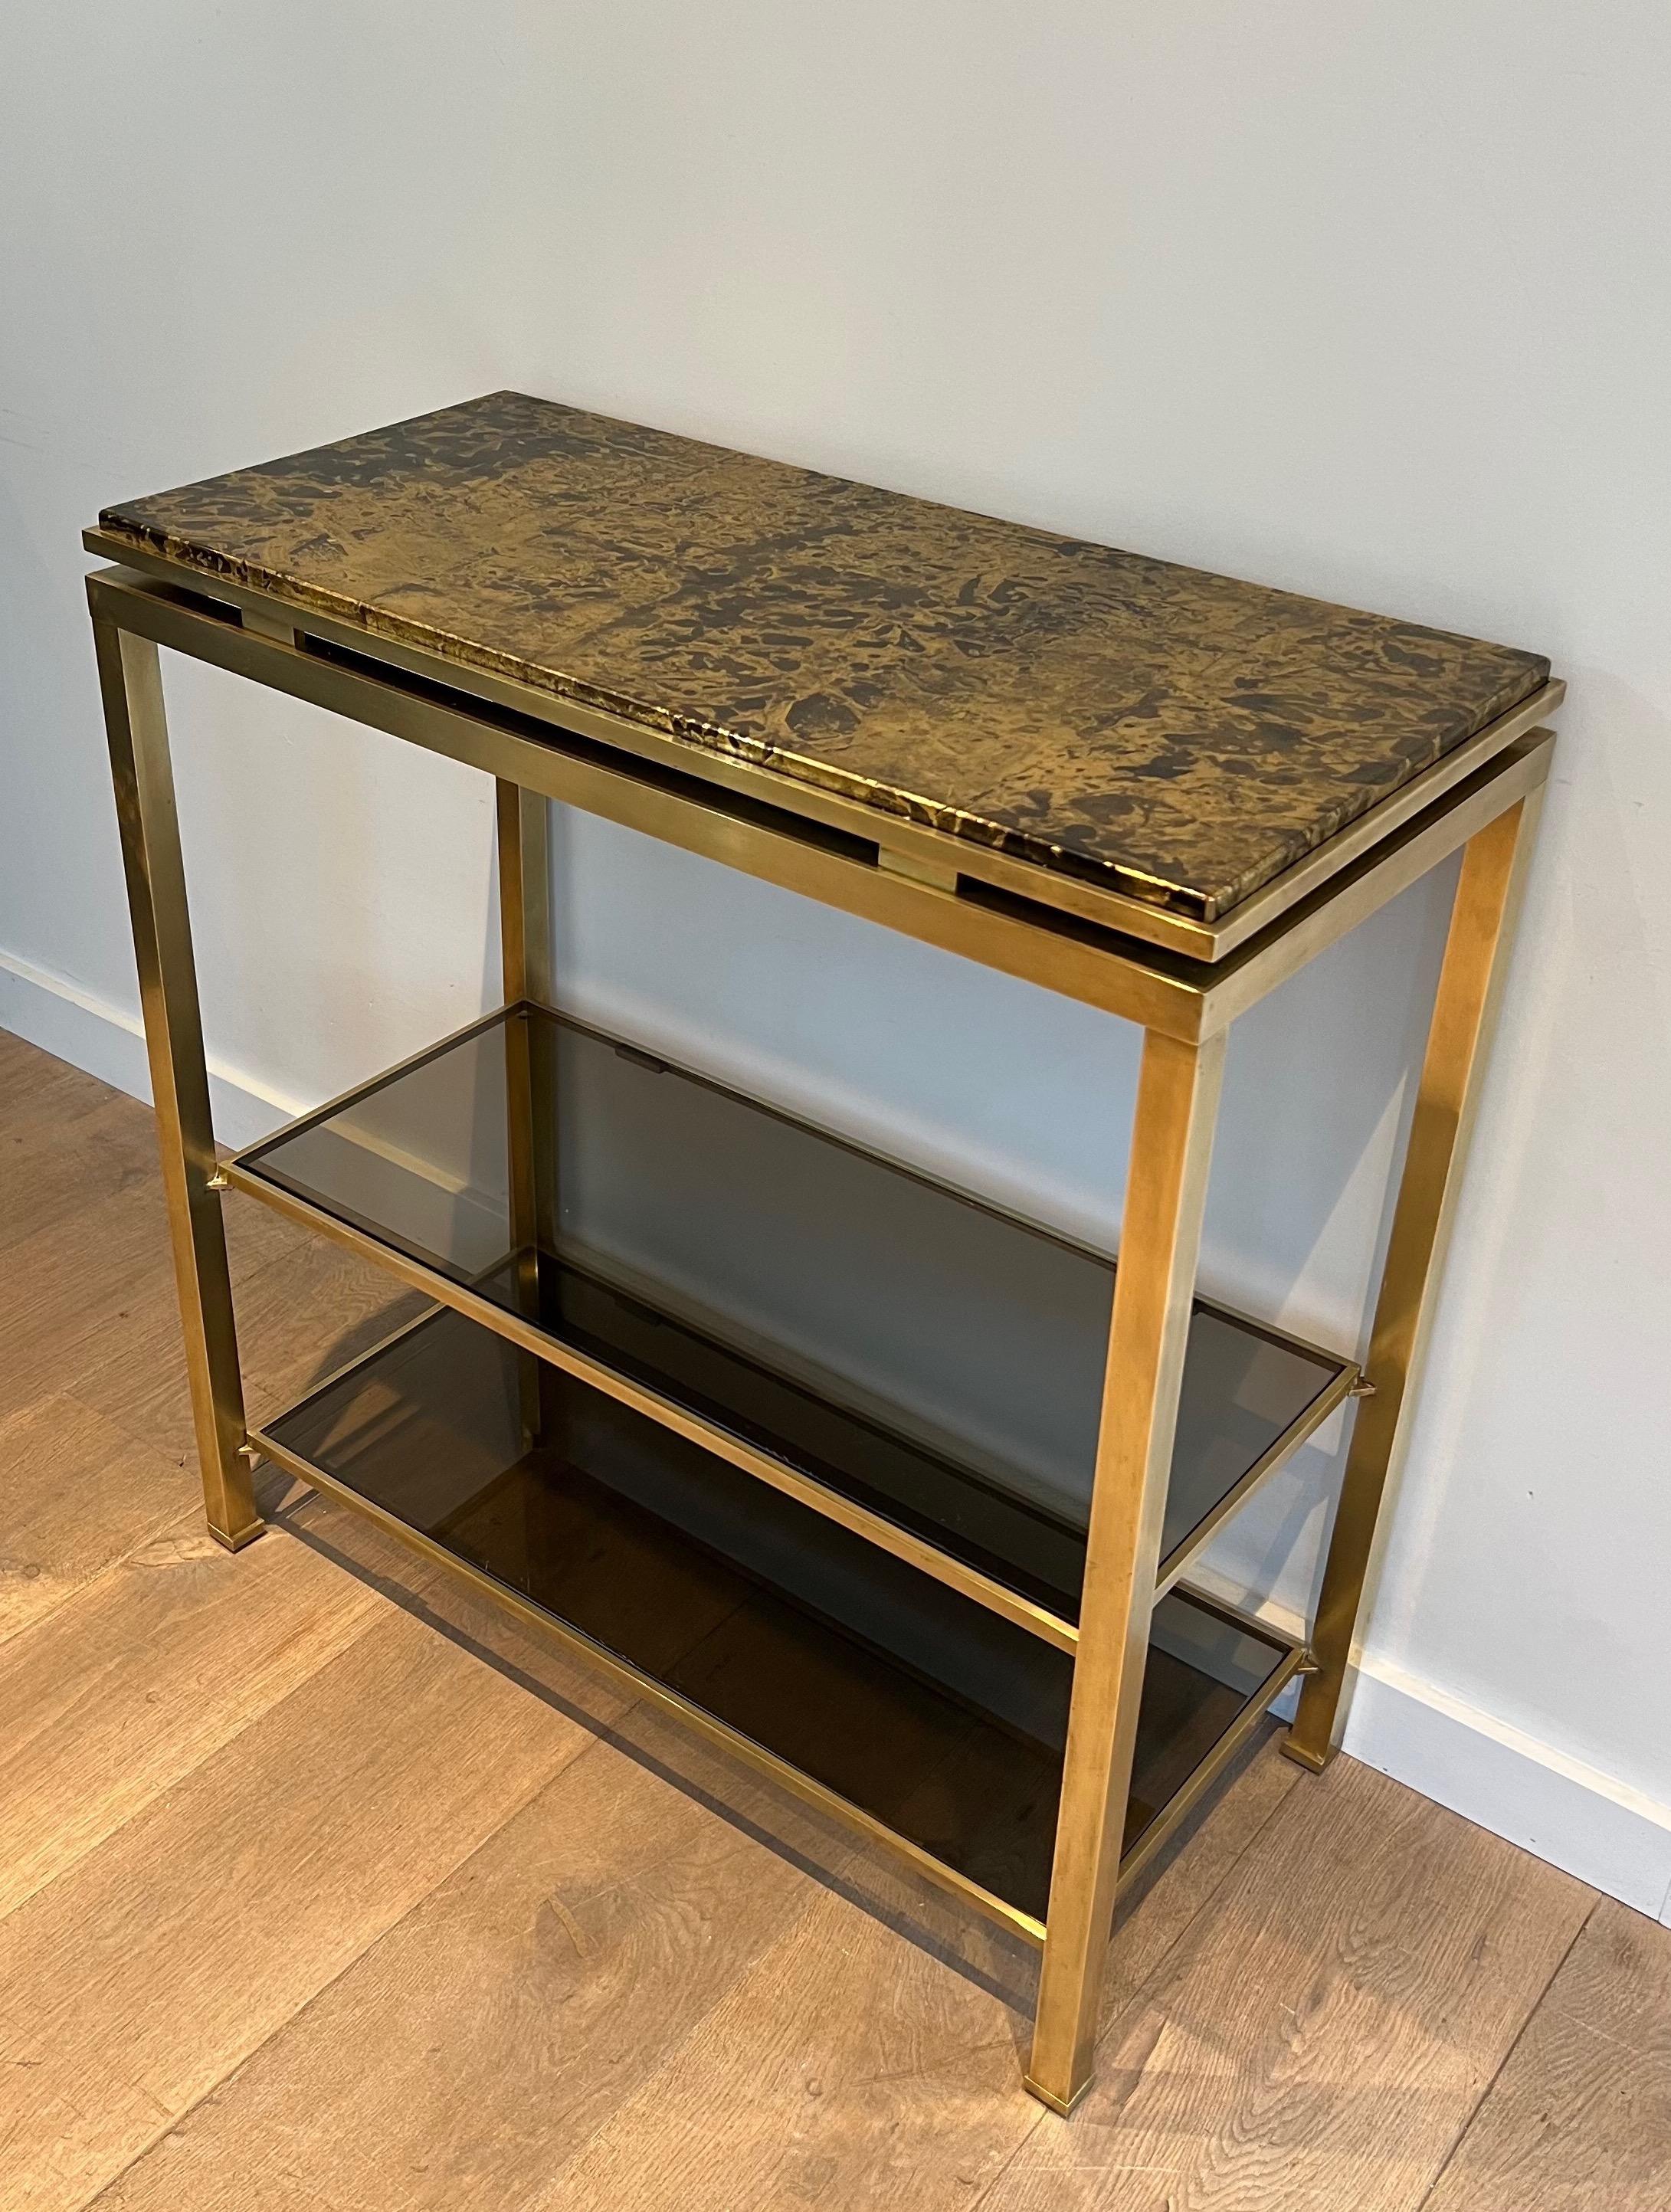 Mid-Century Modern Brass Console Table by Guy Lefèvre for Maison Jansen. Circa 1970